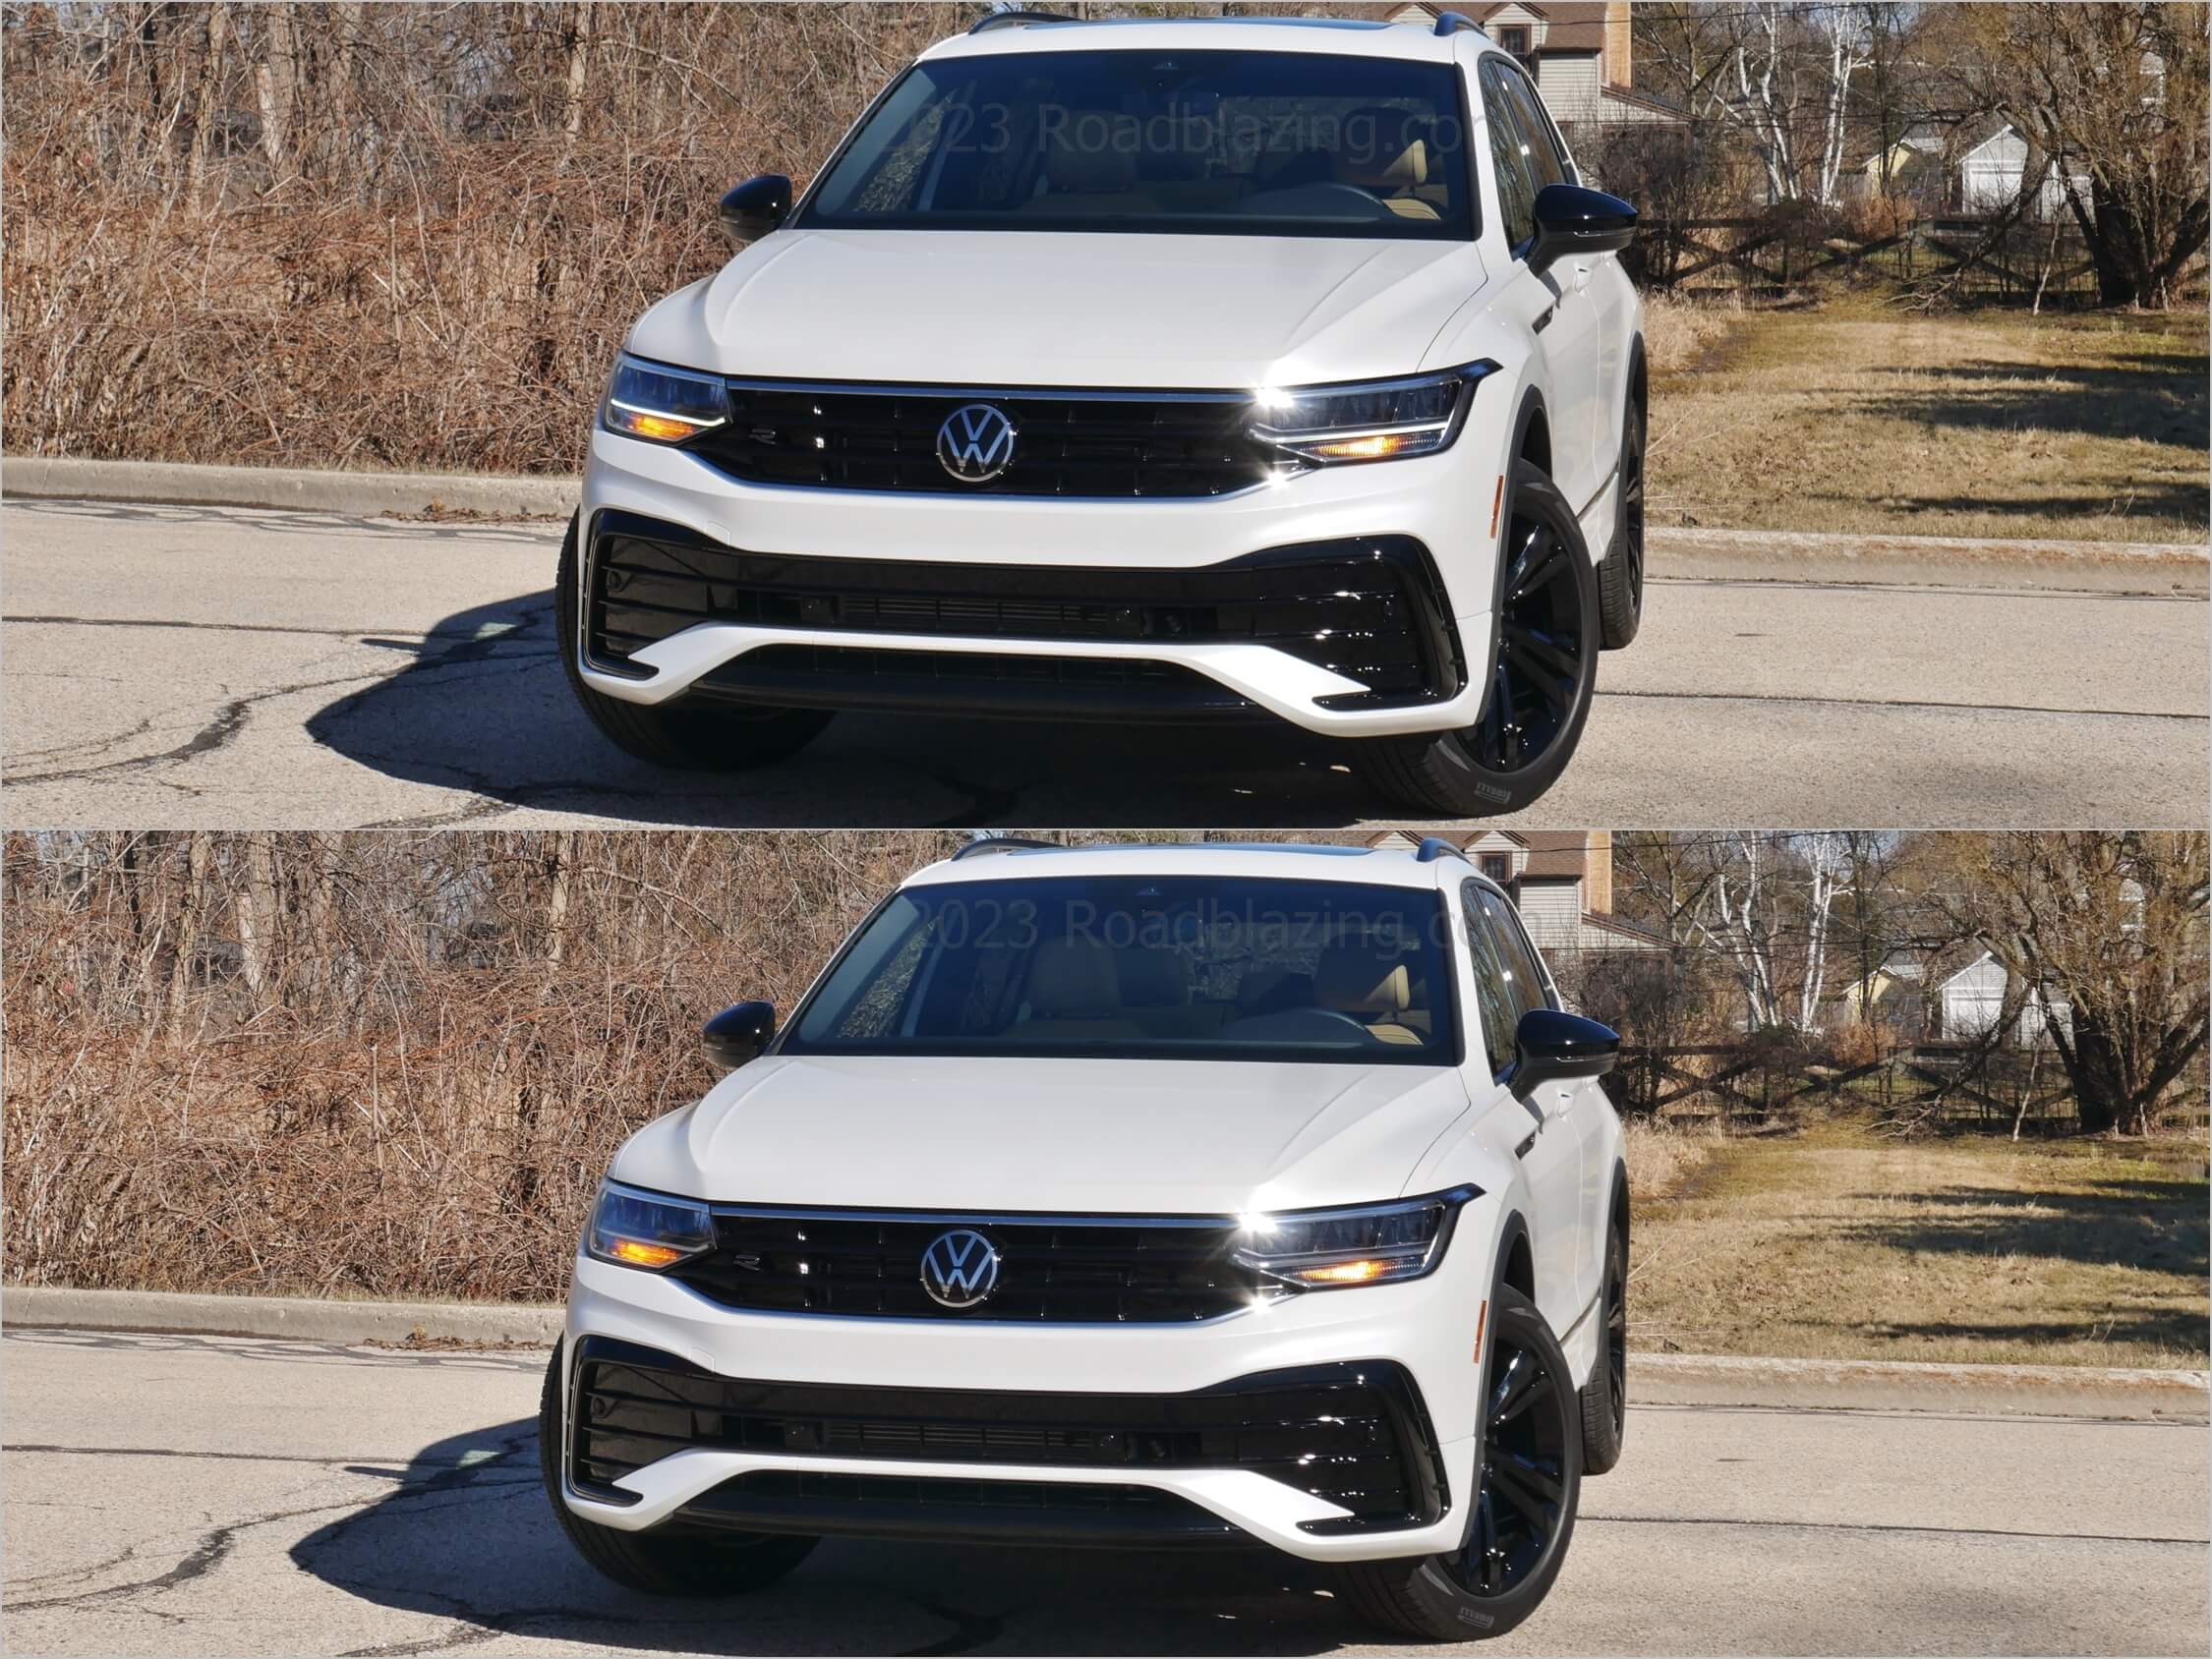 2023 Volkswagen Tiguan SE R-Line Black 3-Row: new widened slim grille w/ subtle "Thor's Hammer white lateral LED directional and bow-tie lower fascia insert were new in 2022.